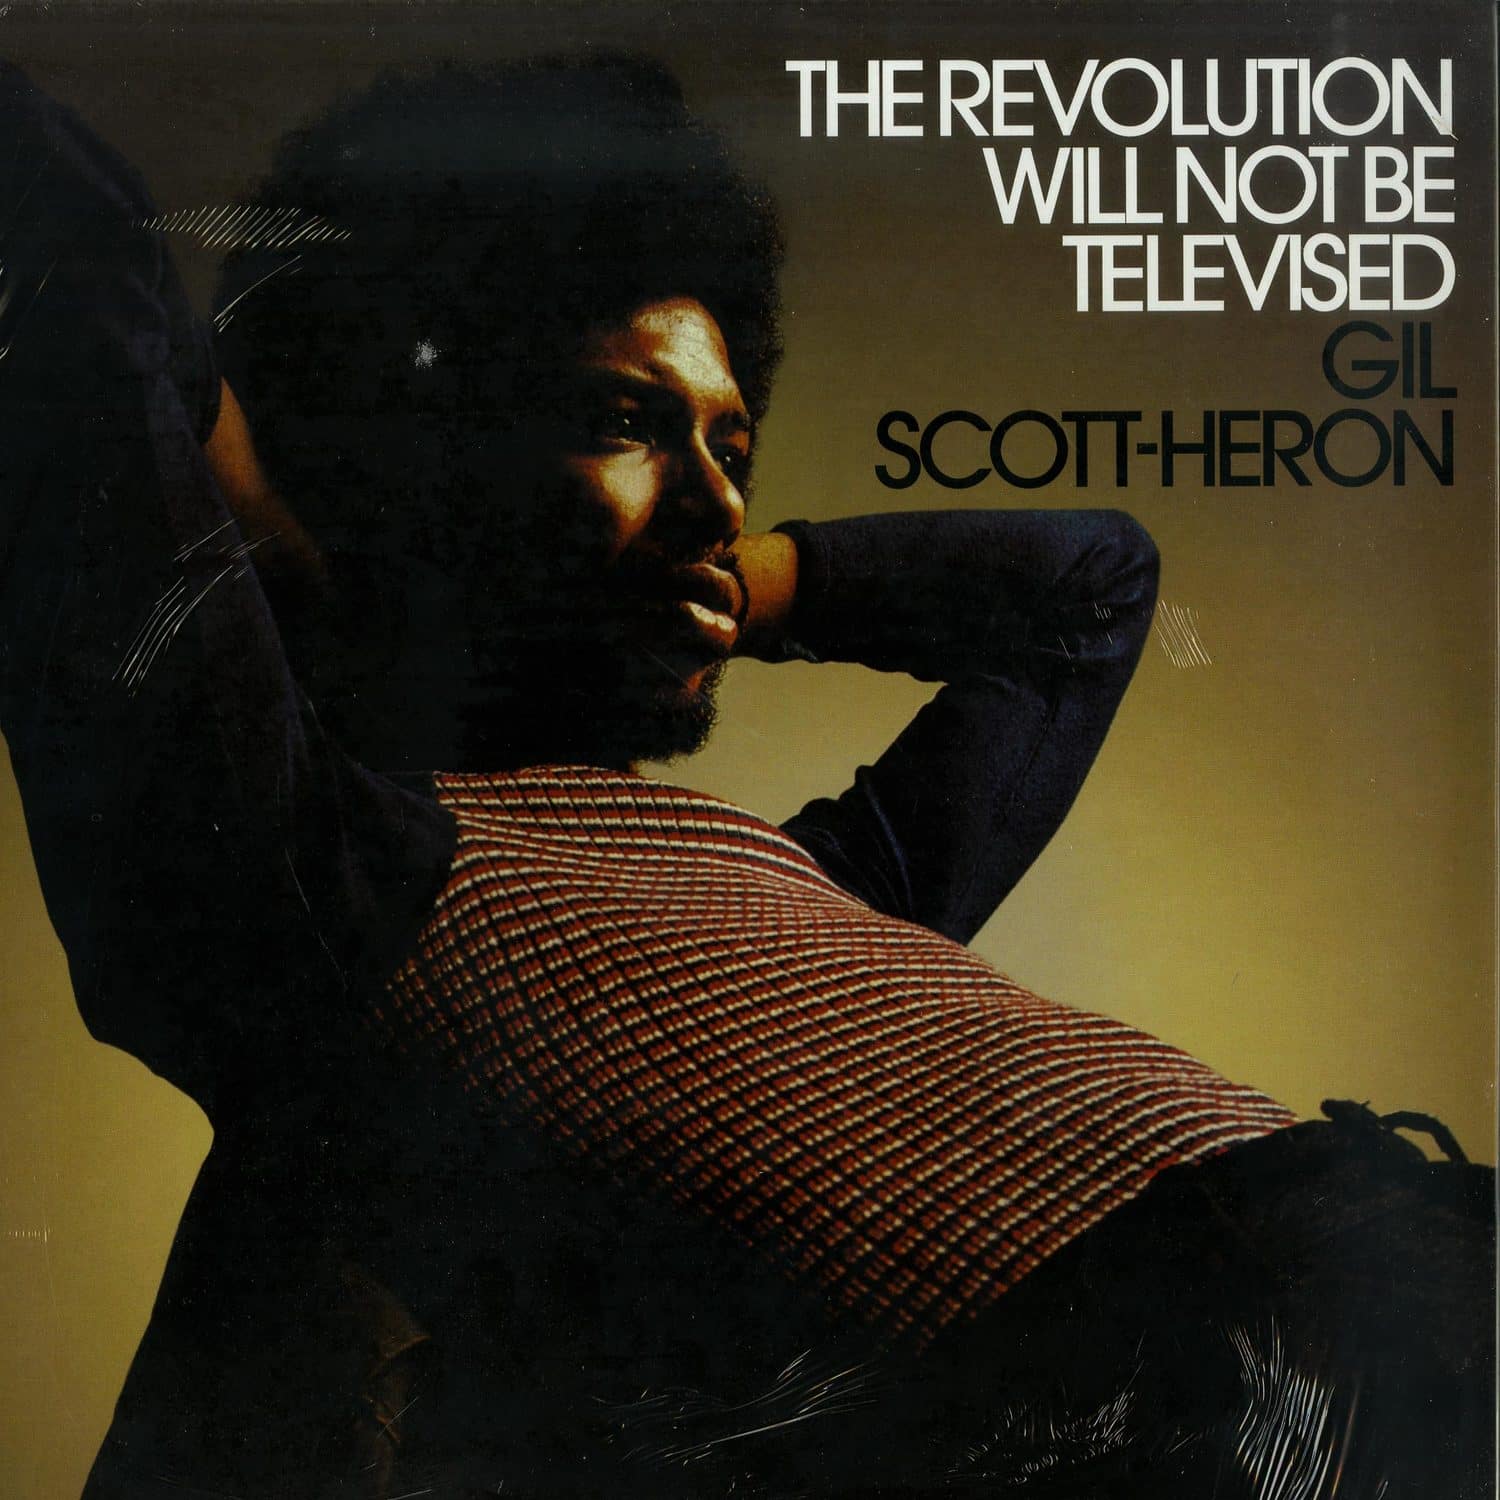 Gil Scott-Heron - THE REVOLUTION WILL NOT BE TELEVISED 